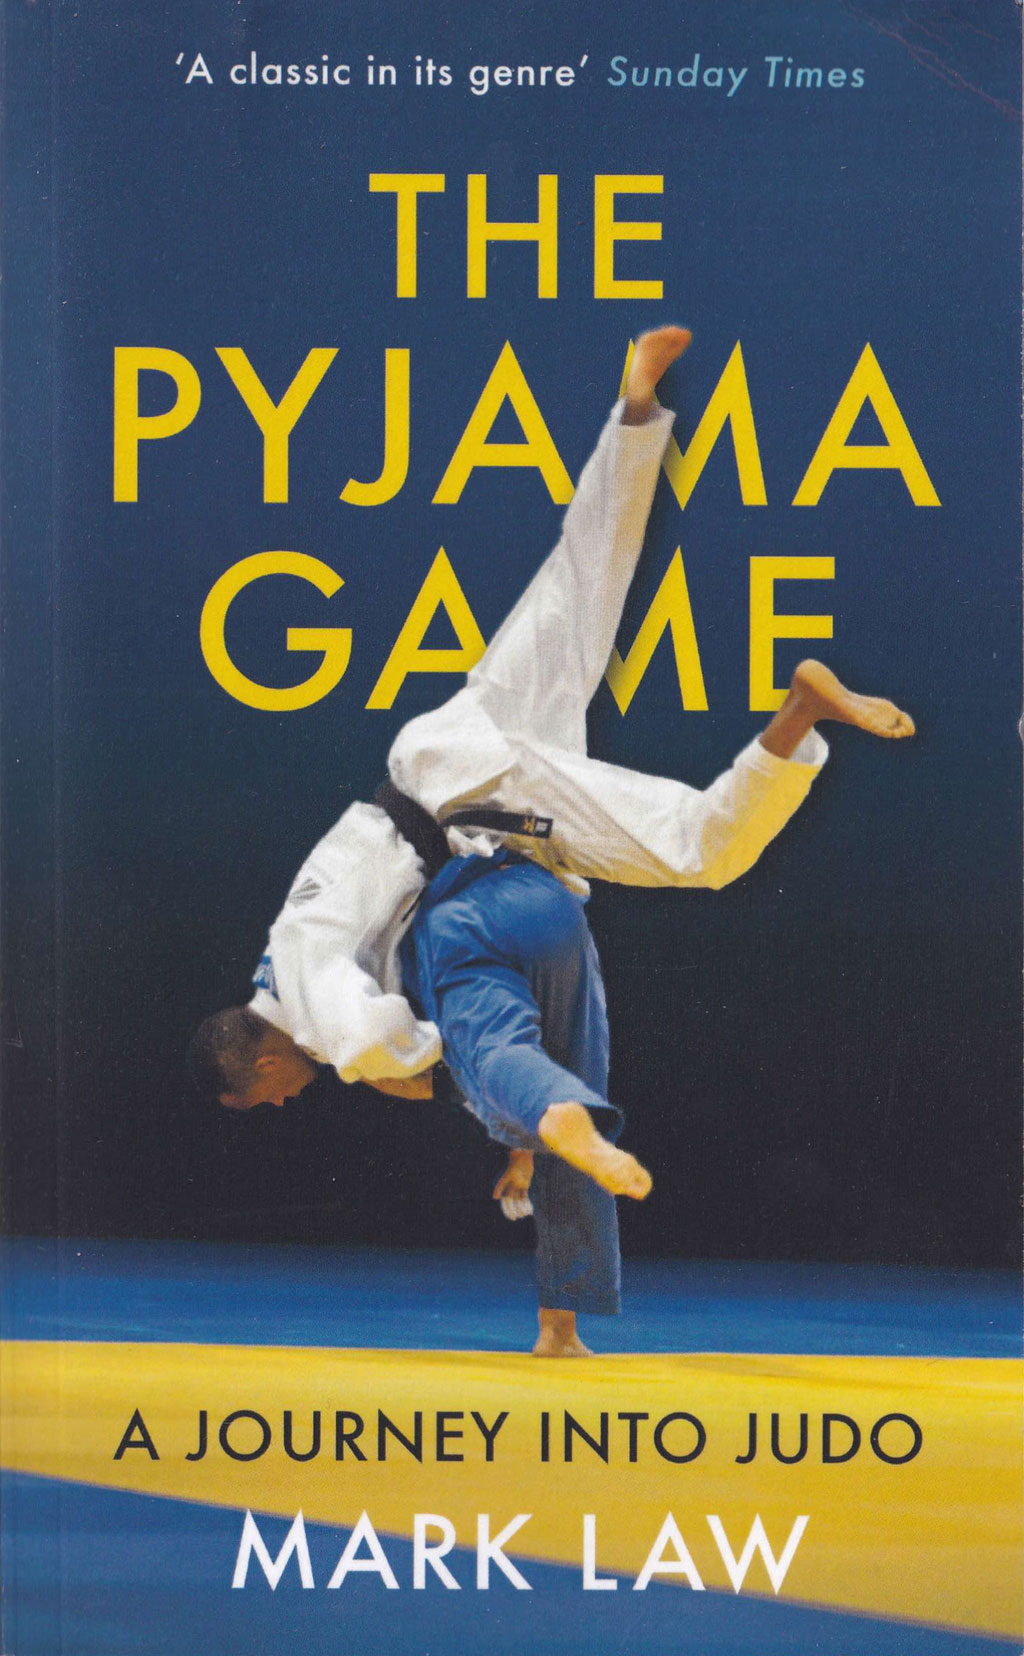 Judo sport book The Pyjama Game by author Mark Law, book cover